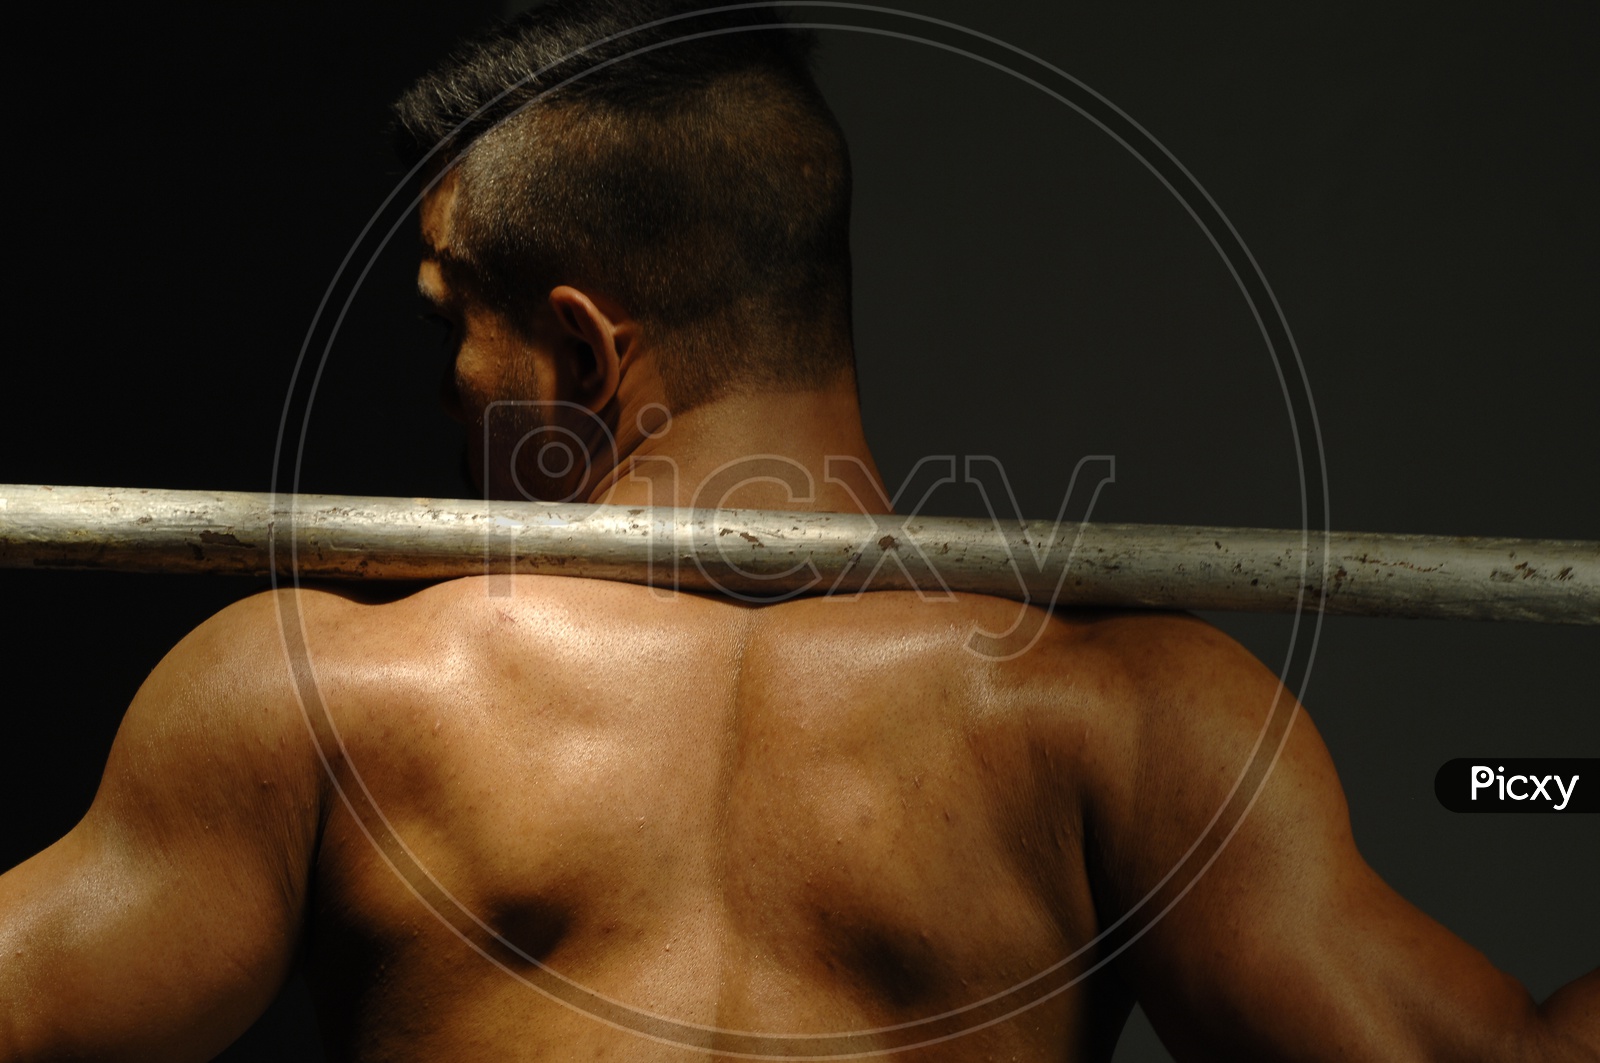 Indian Muscular Man flexing his back with undercut hairstyle